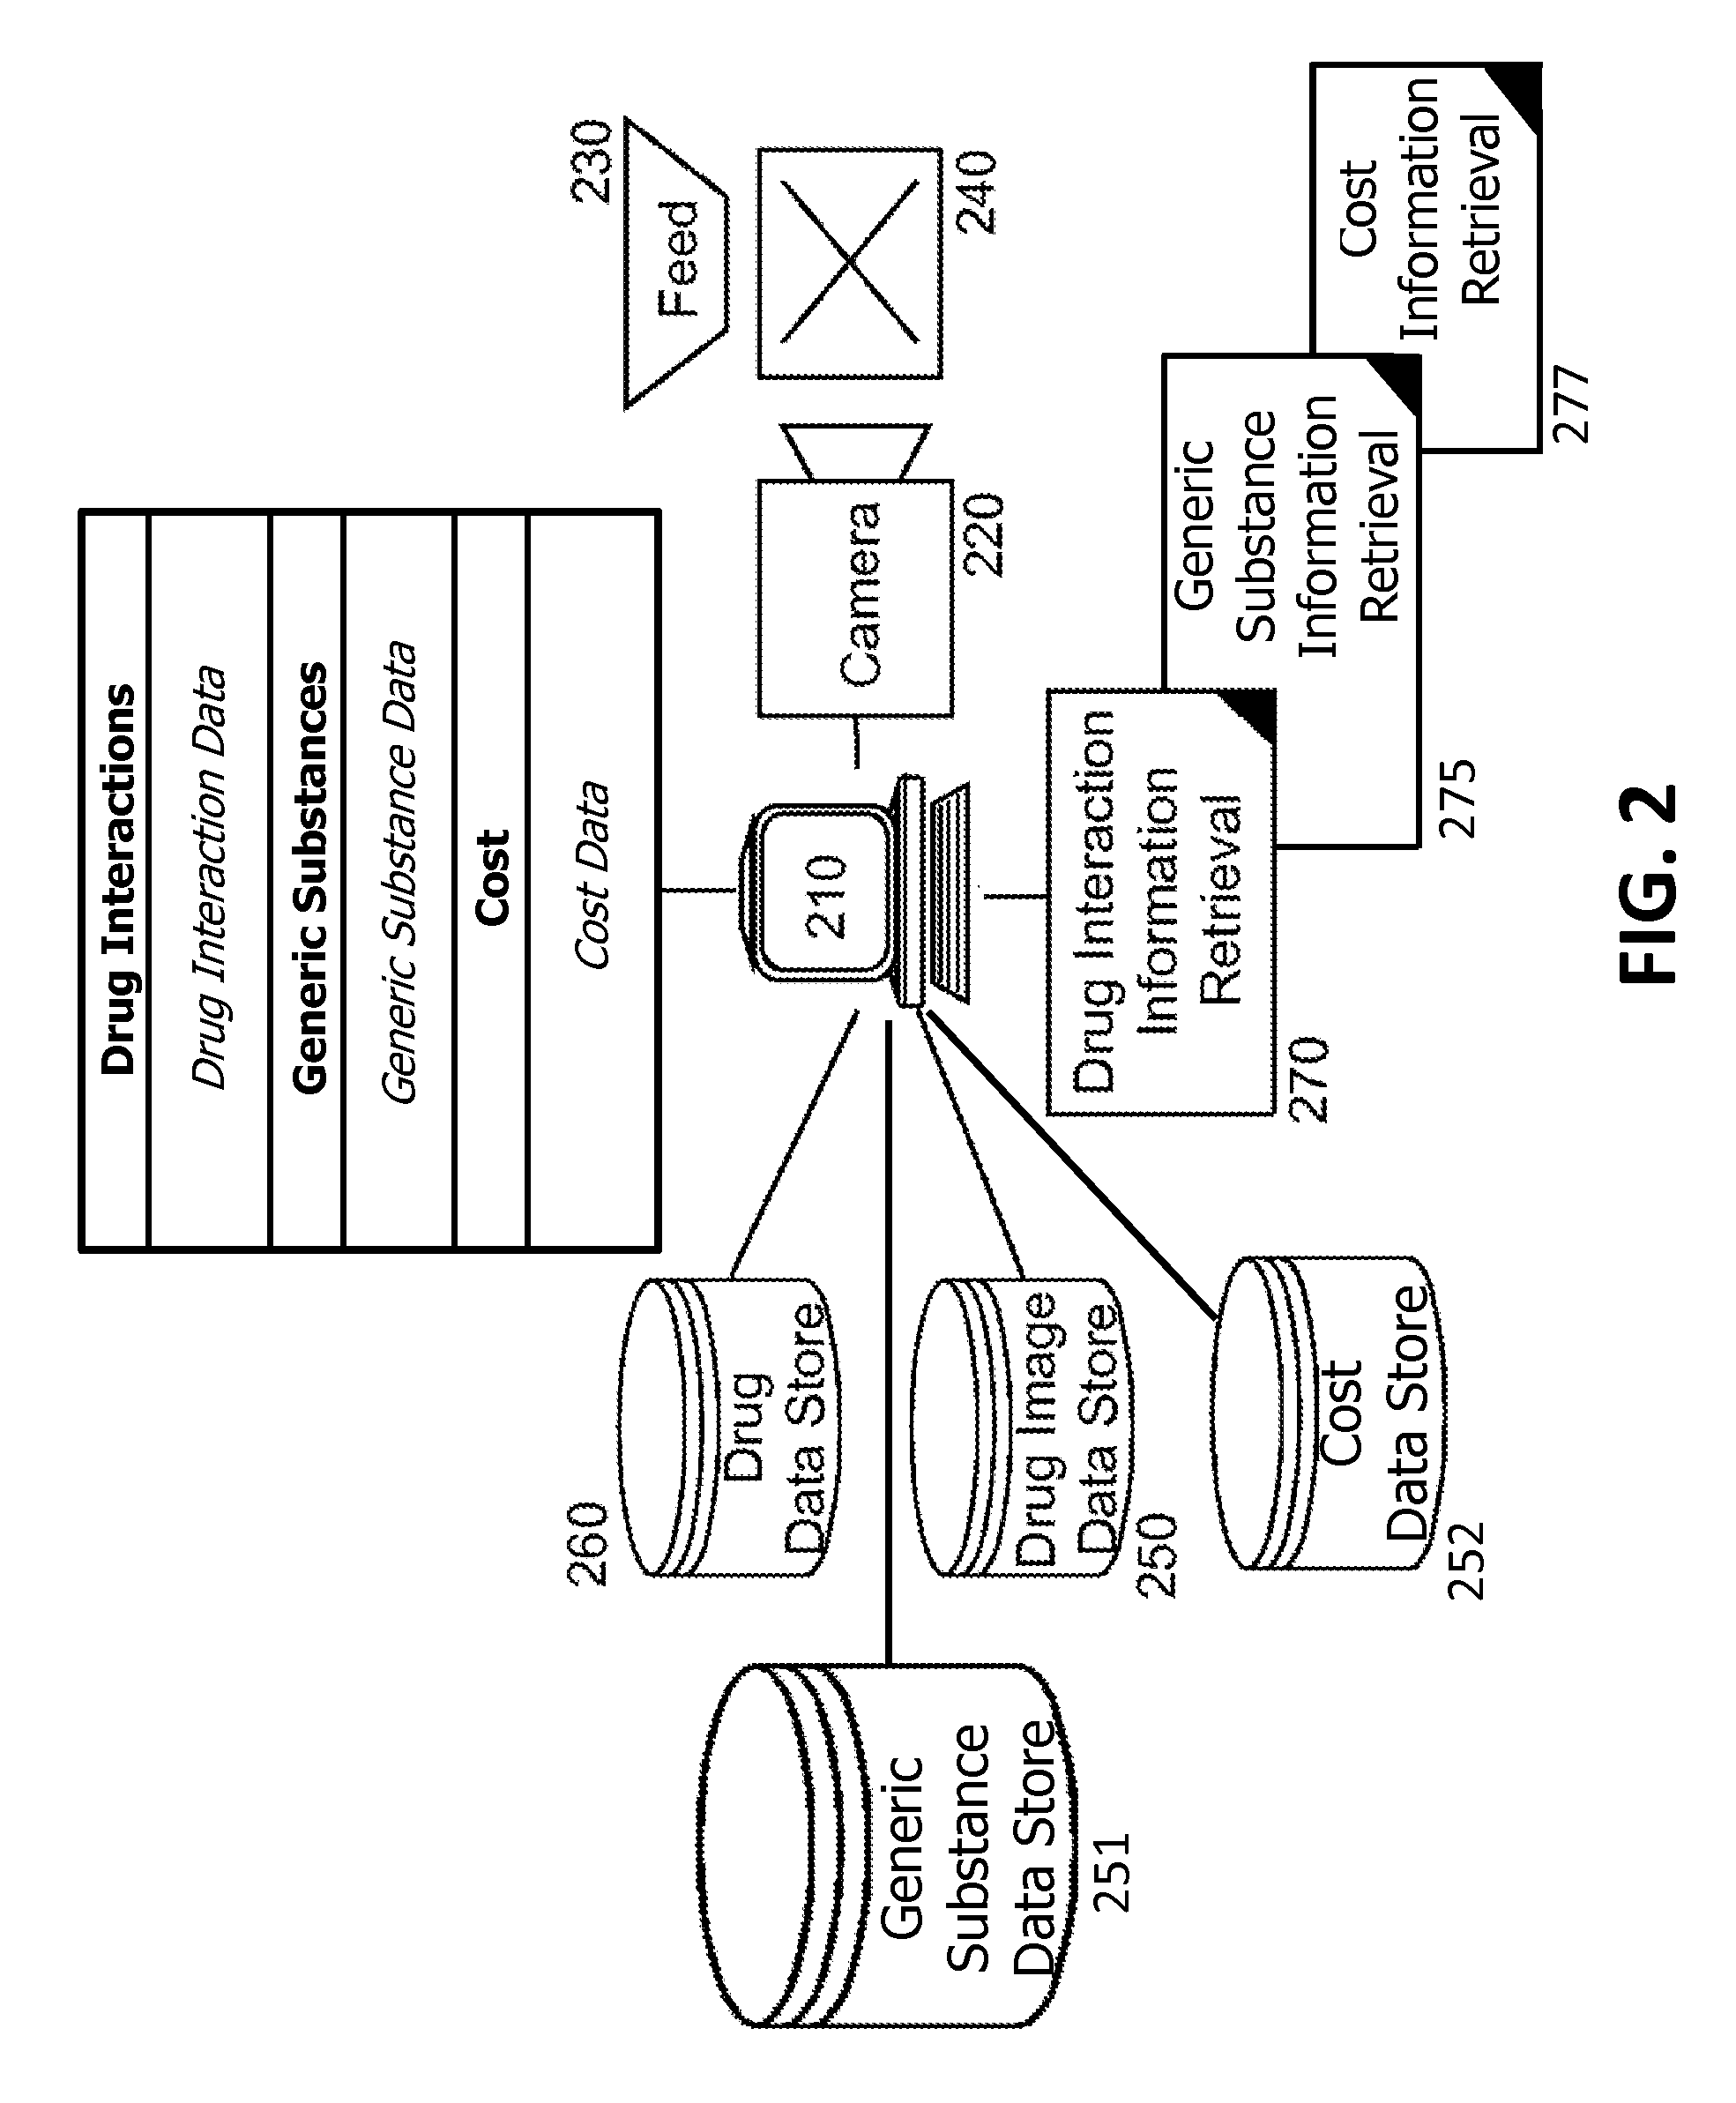 Generic substance information retrieval using mobile device